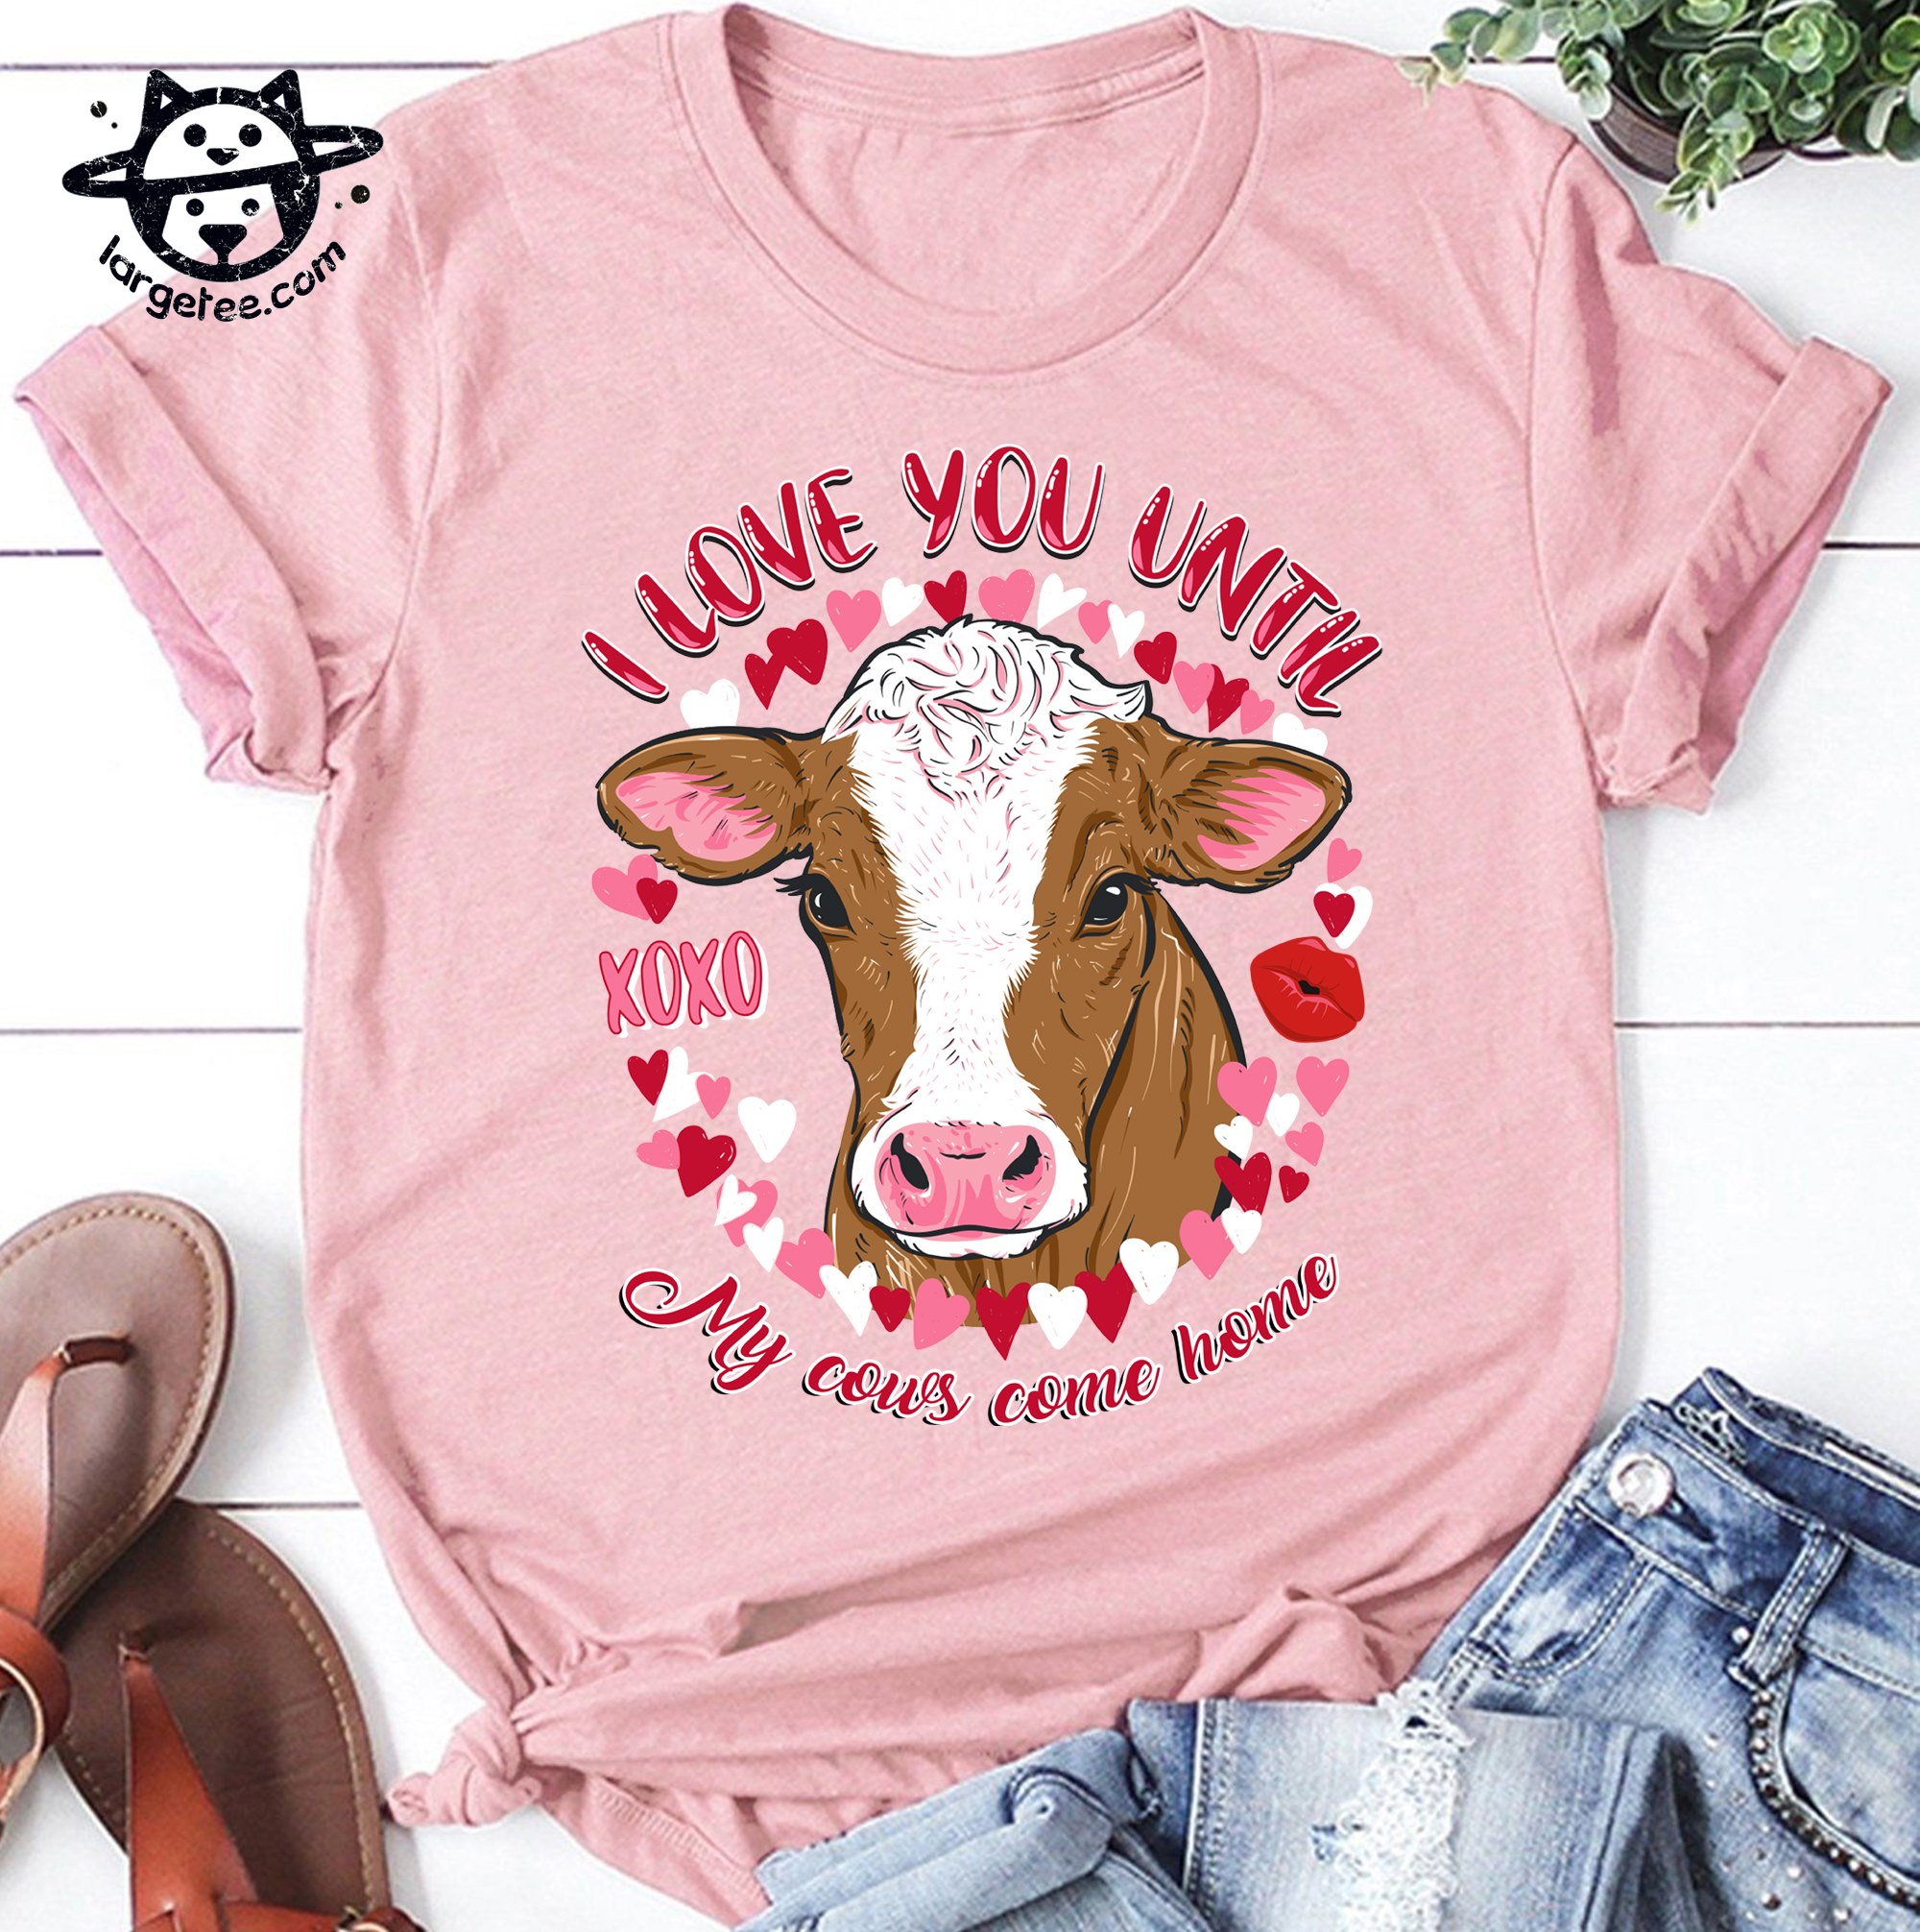 I love you until my cows come home - Cow lover